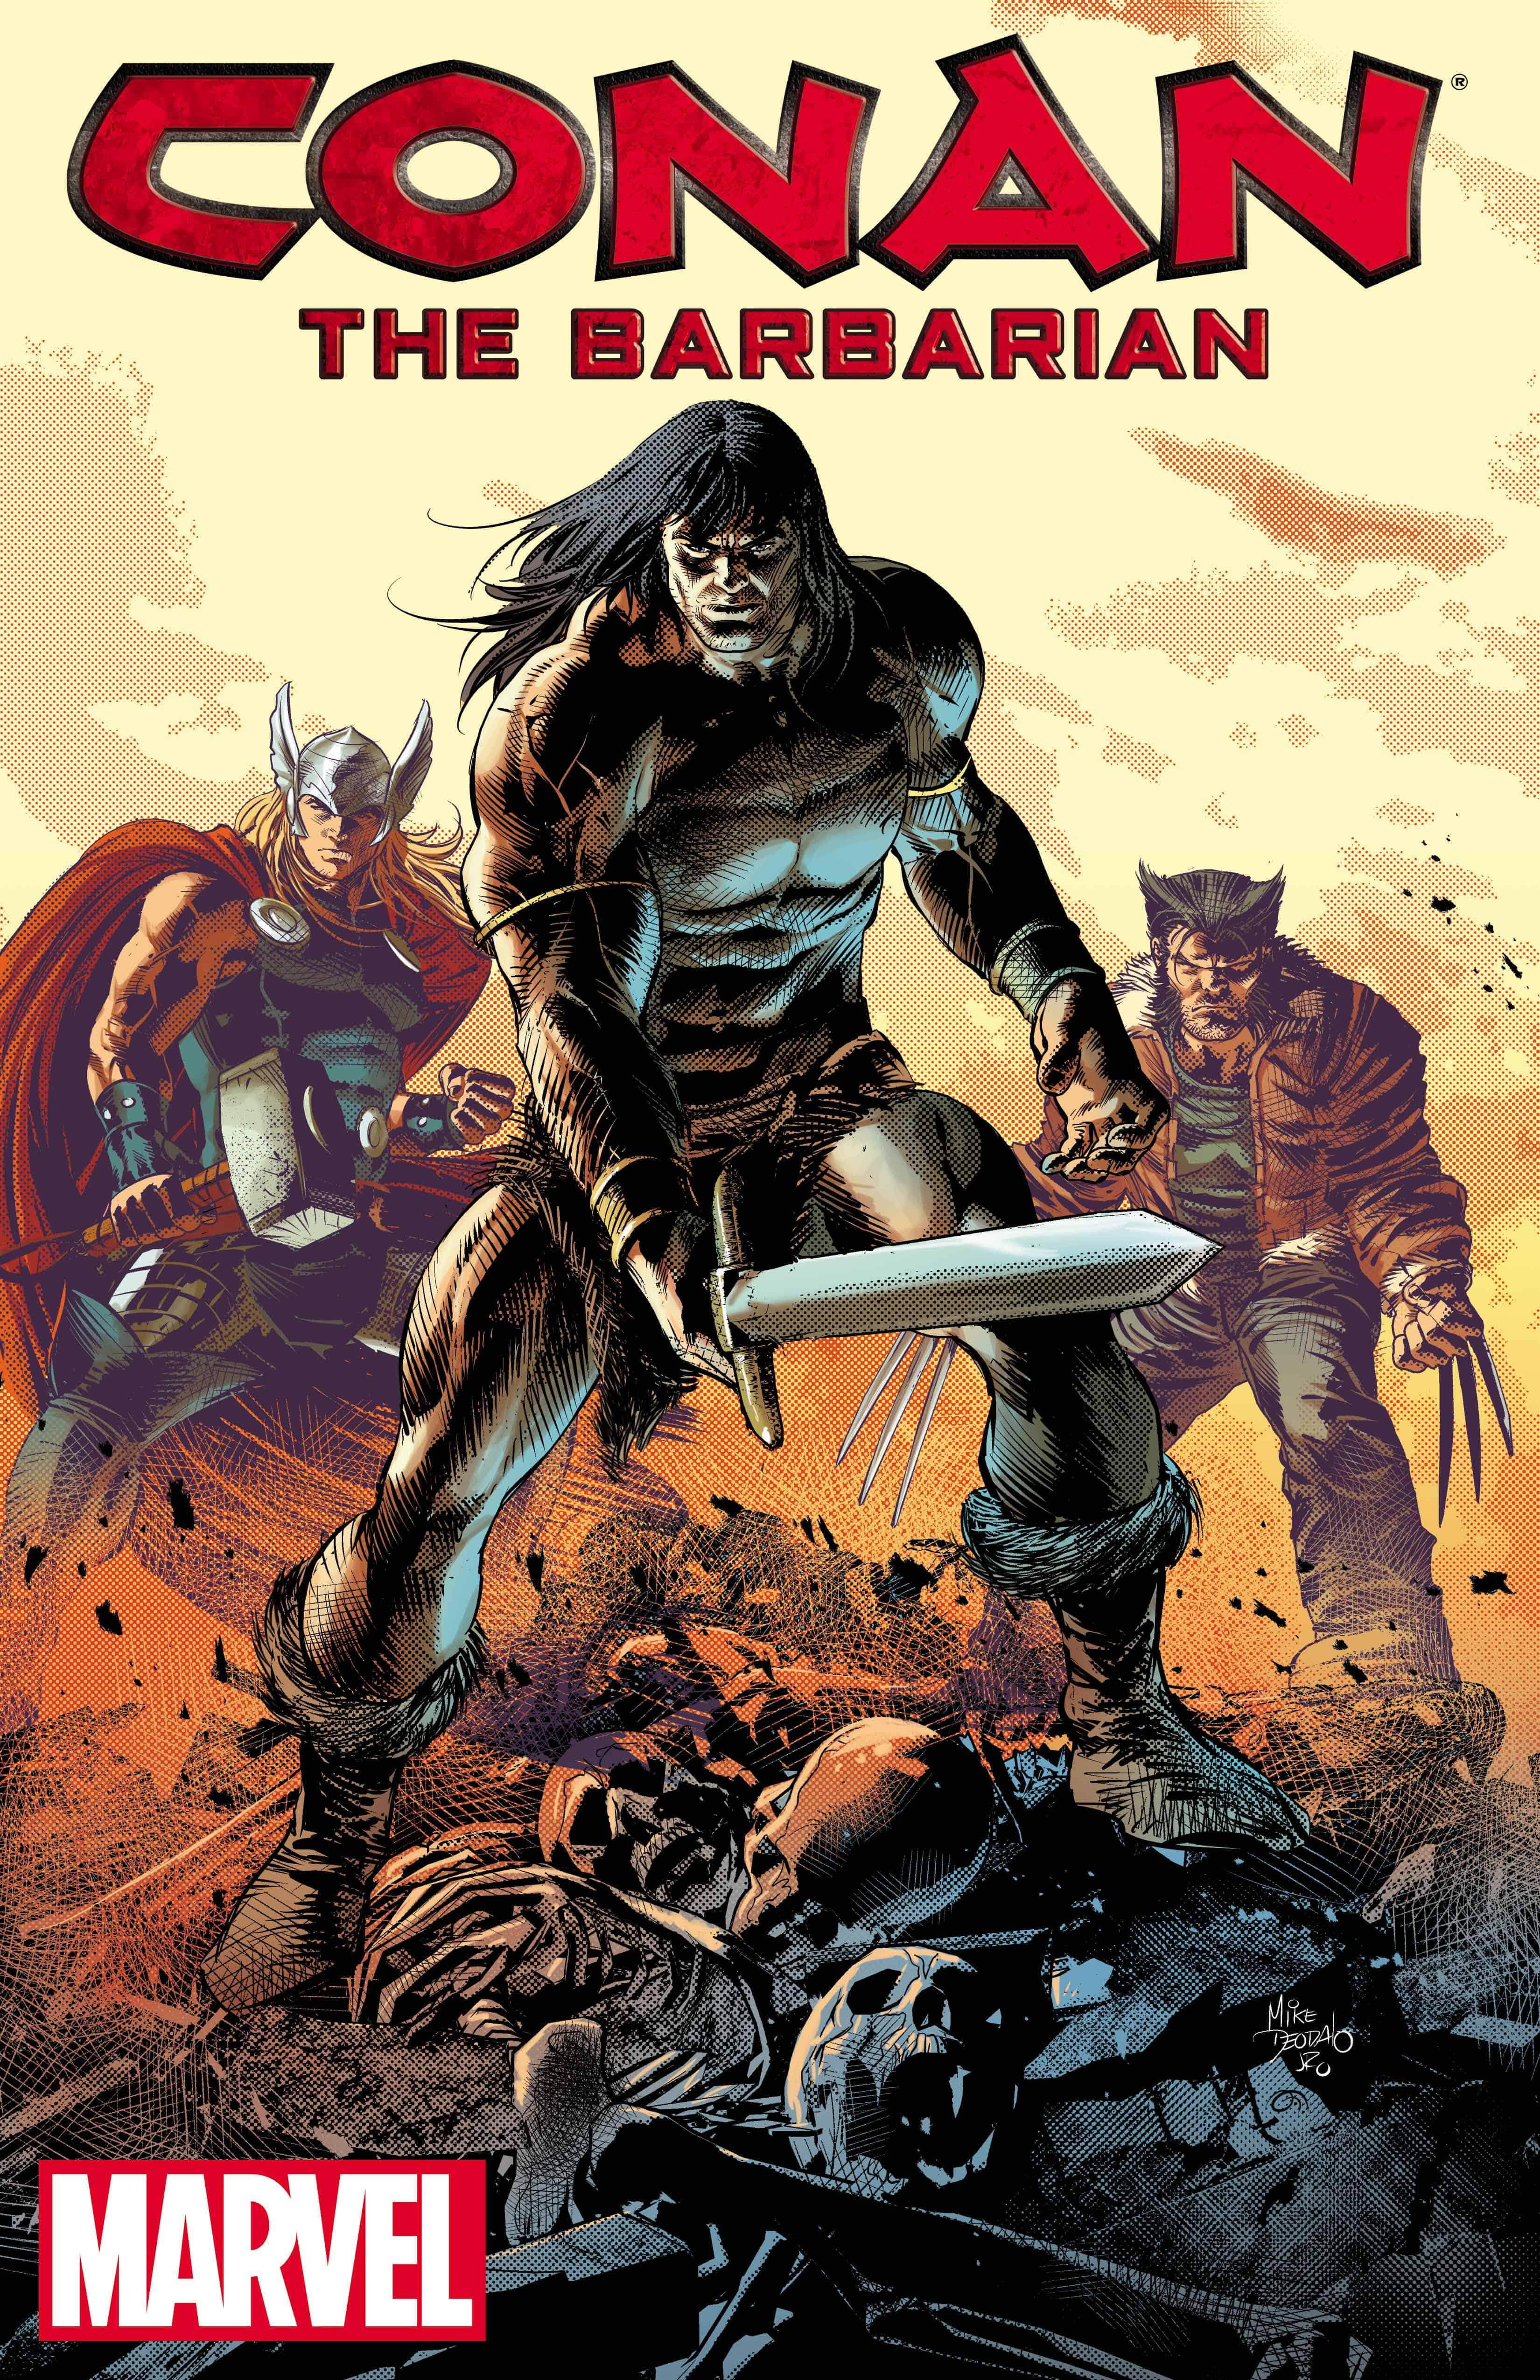 First Watch Conan Returns to Marvel in 2019! Comic Watch